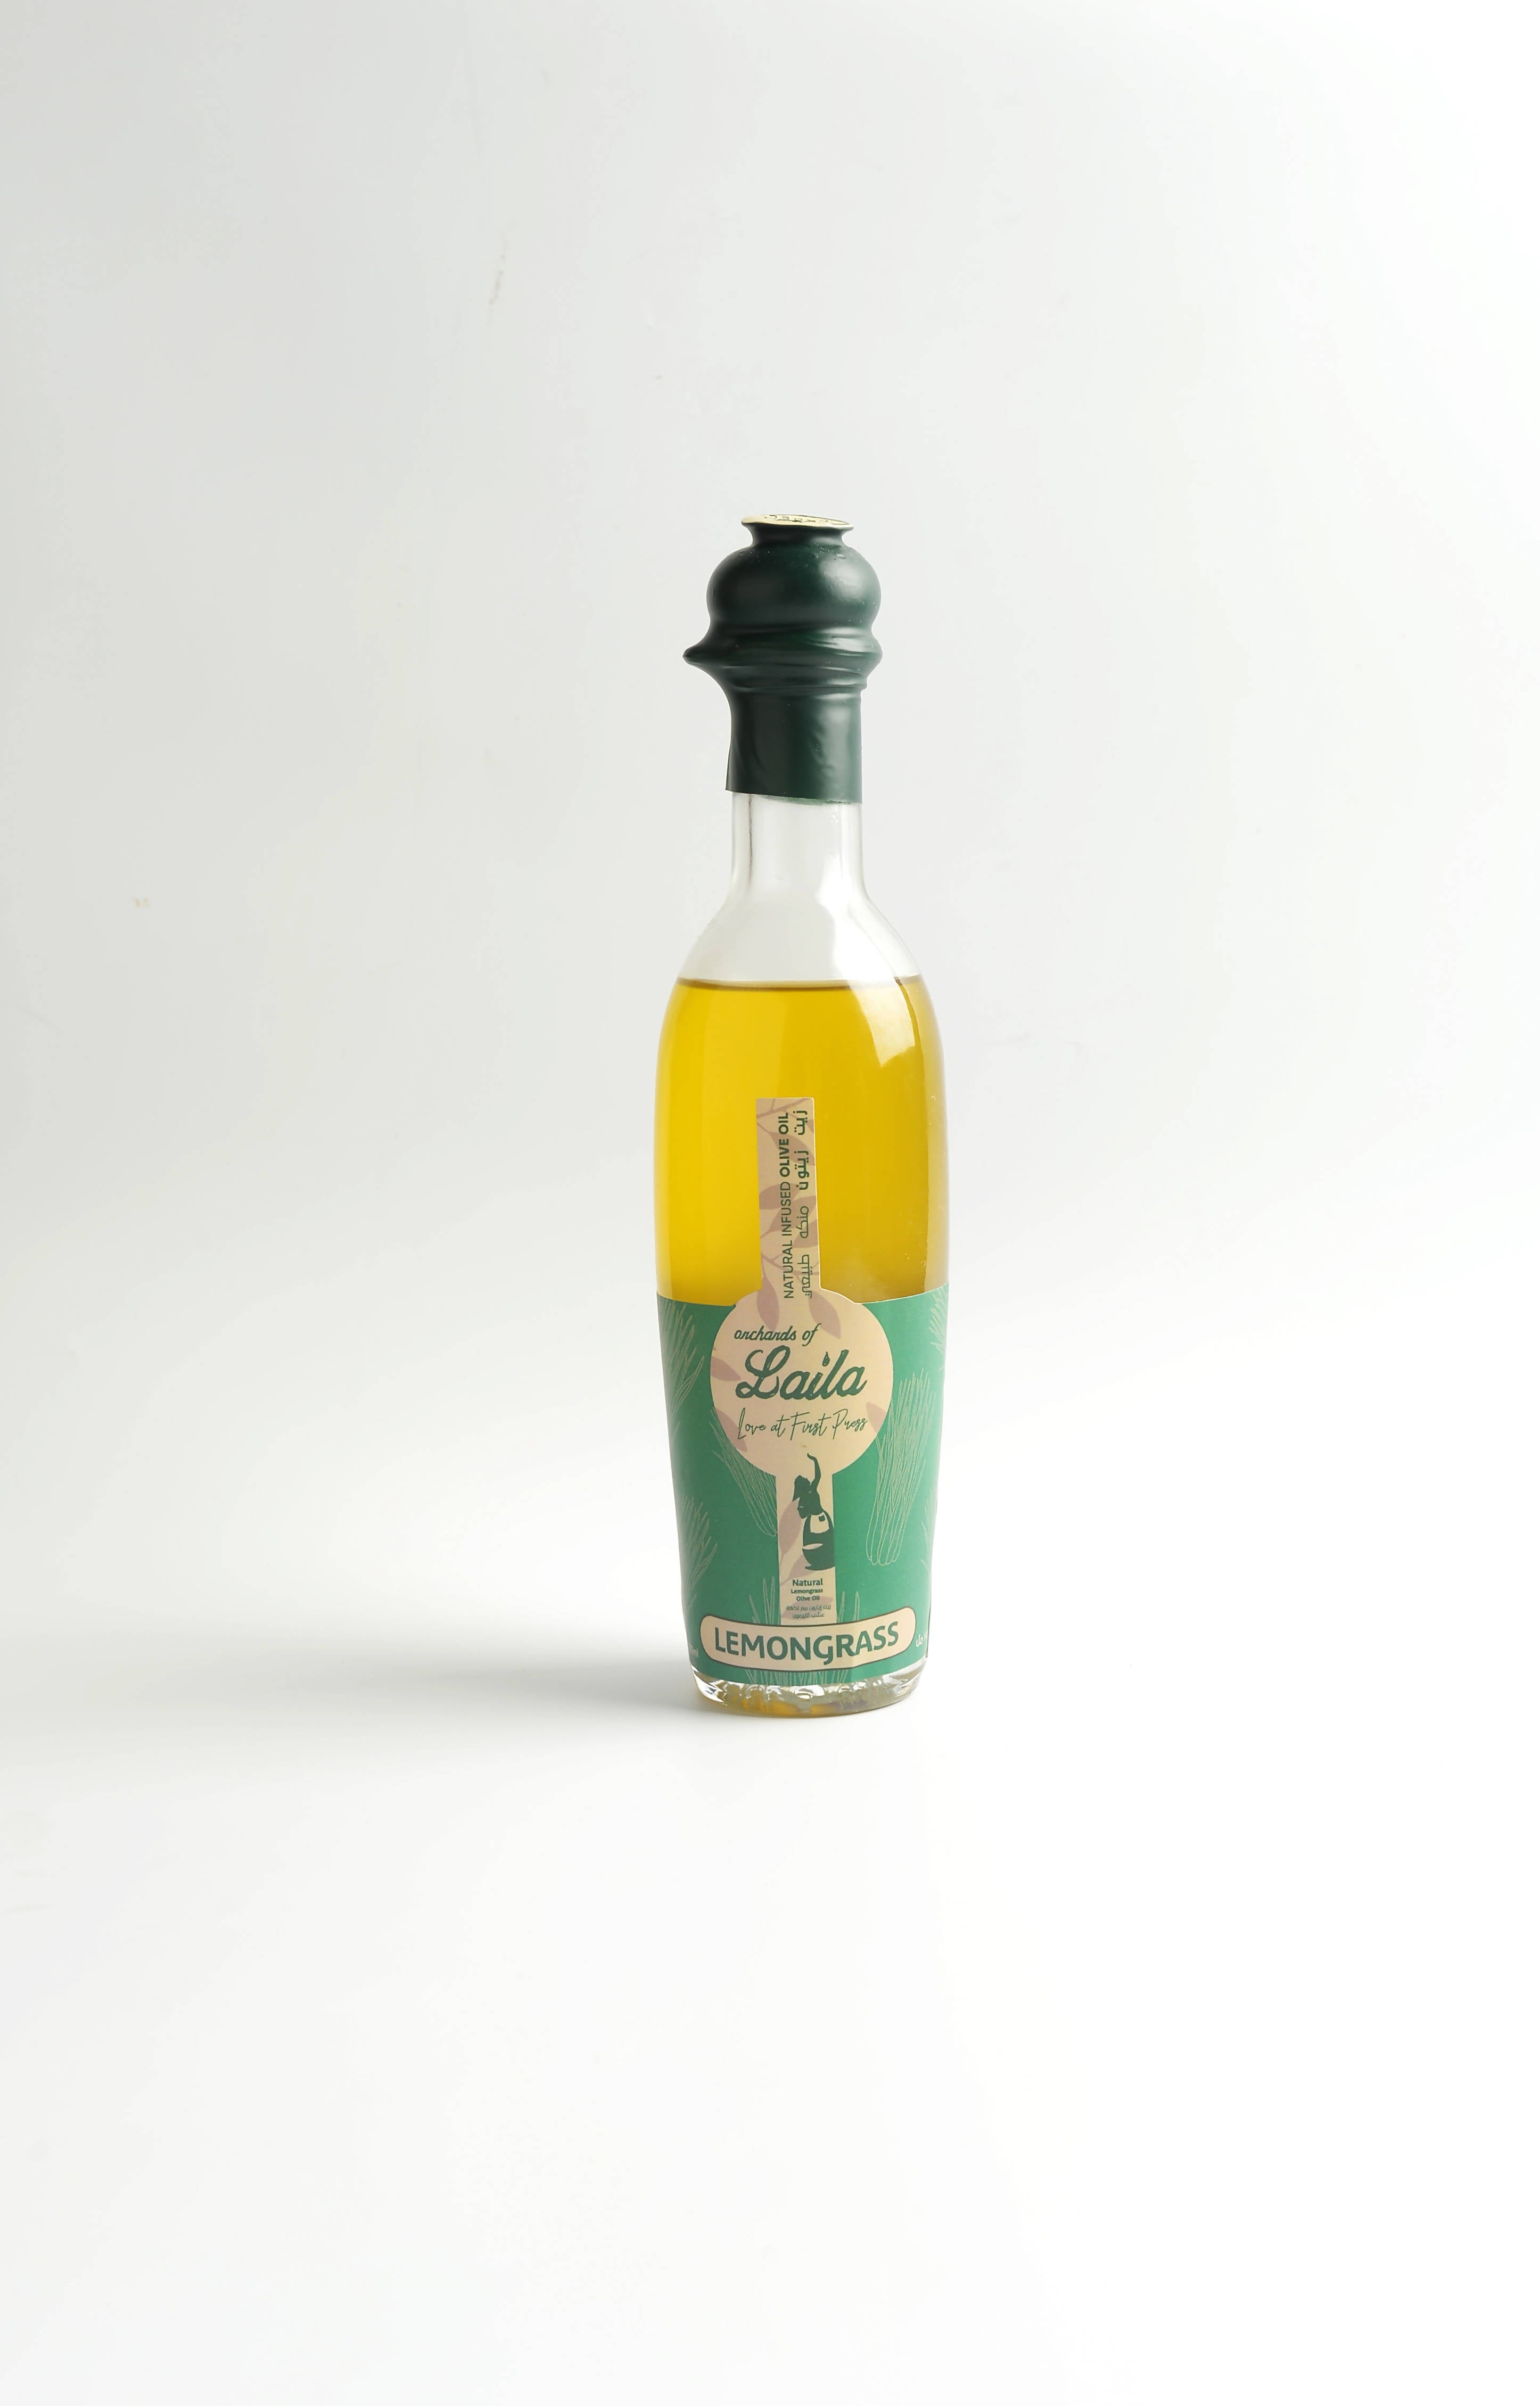 orchards of Laila Lemongrass infused olive oil 250 ml